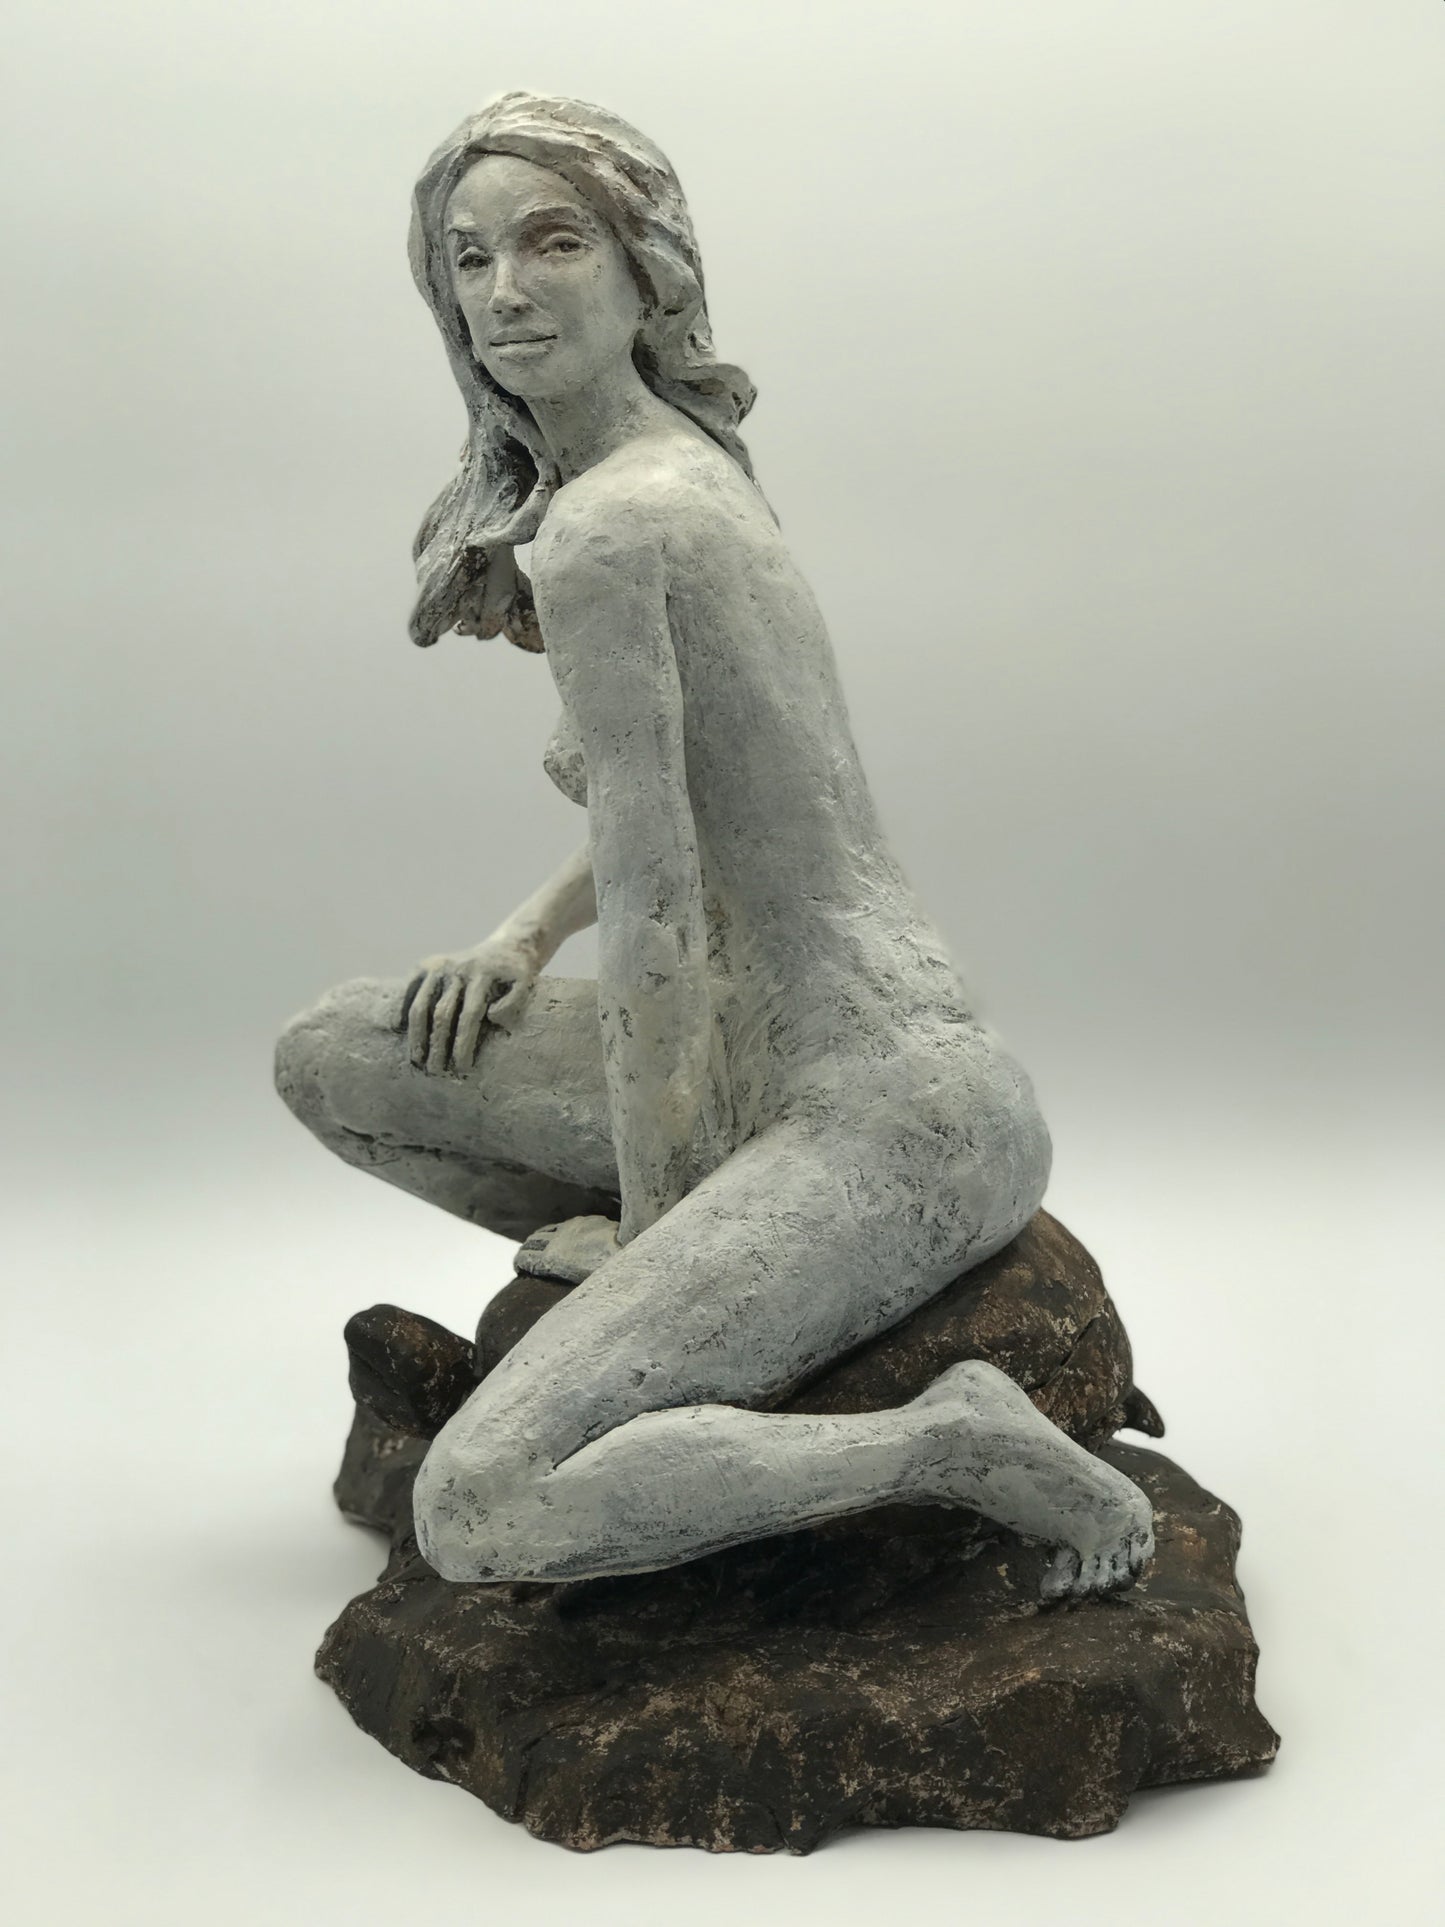 Clay figure sculpture of a woman seated on a turtle